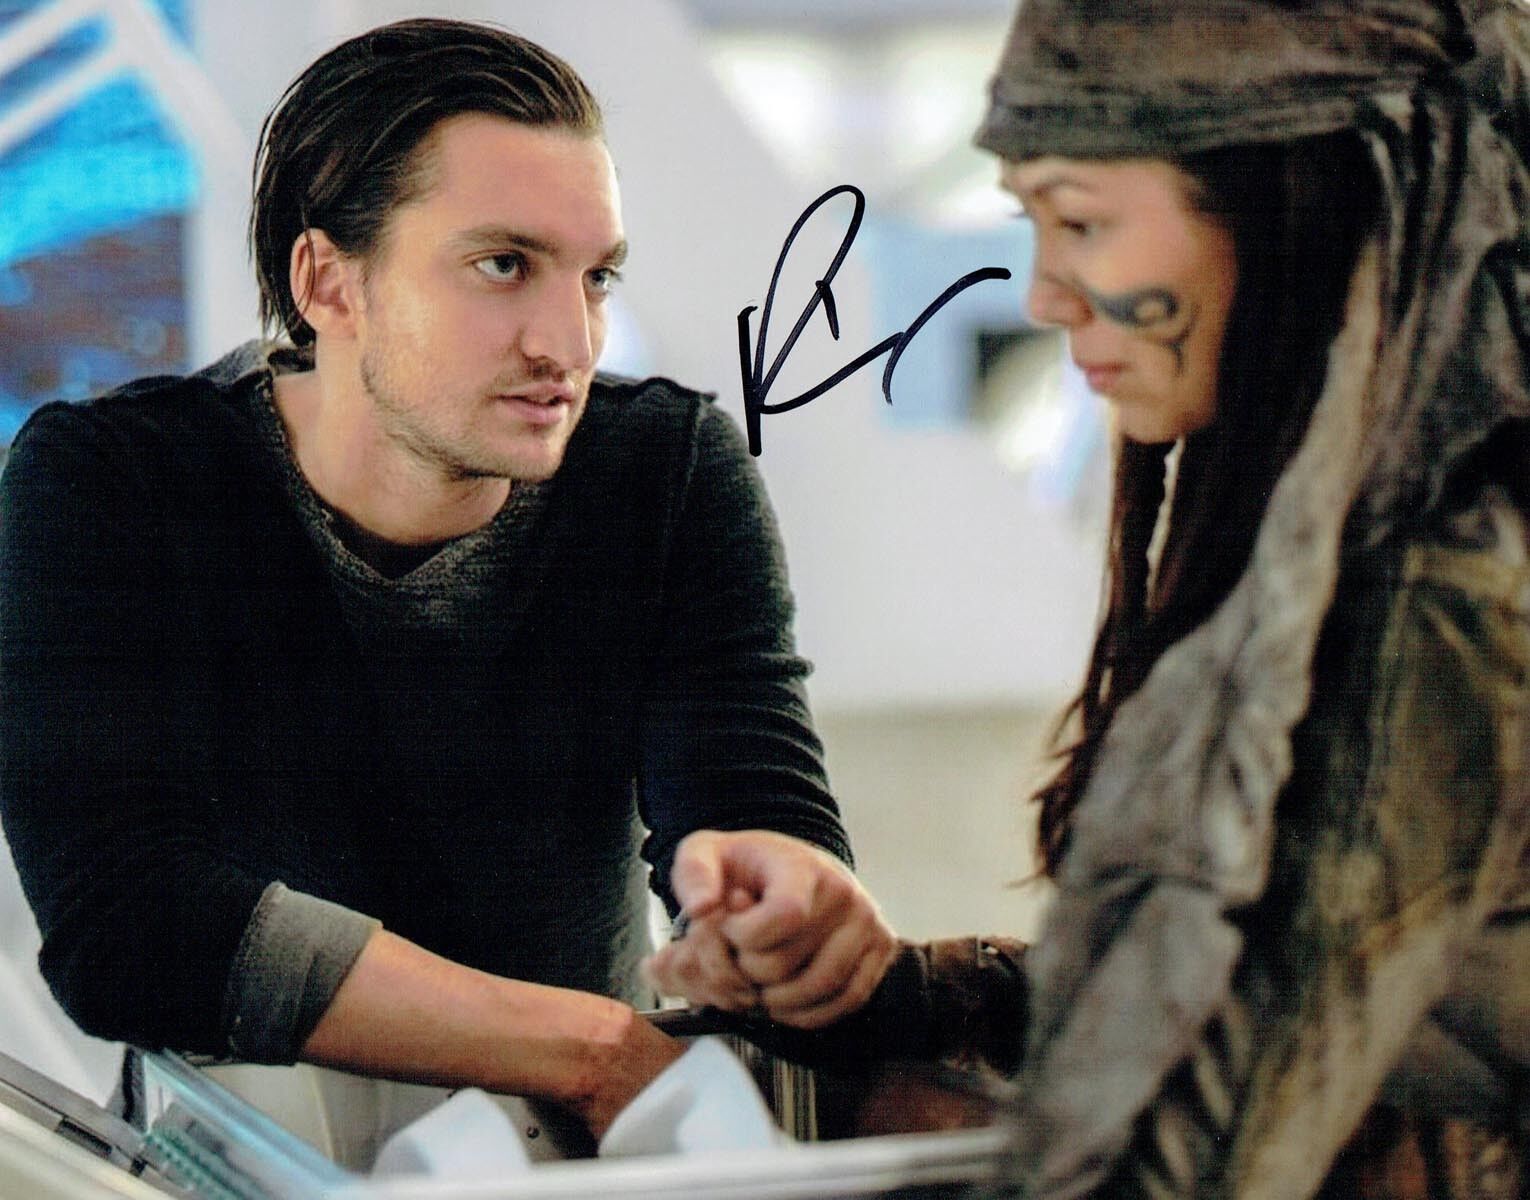 Richard HARMON Signed Autograph The 100 Actor Film 10x8 Photo Poster painting 2 AFTAL COA